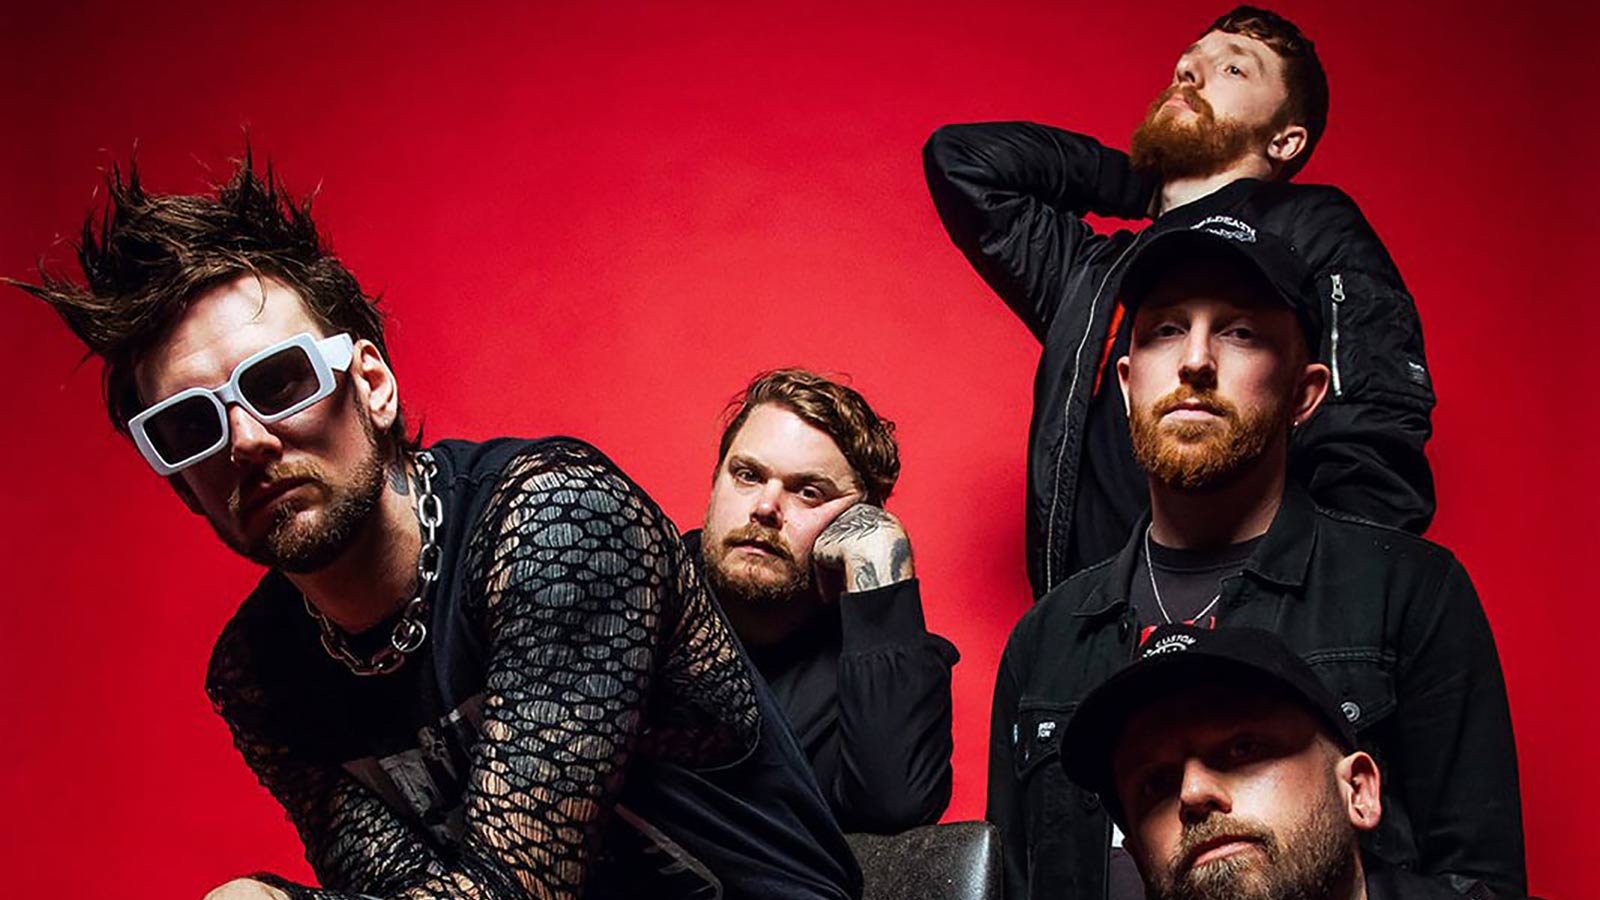 Hear WHILE SHE SLEEPS' upbeat new metalcore song 